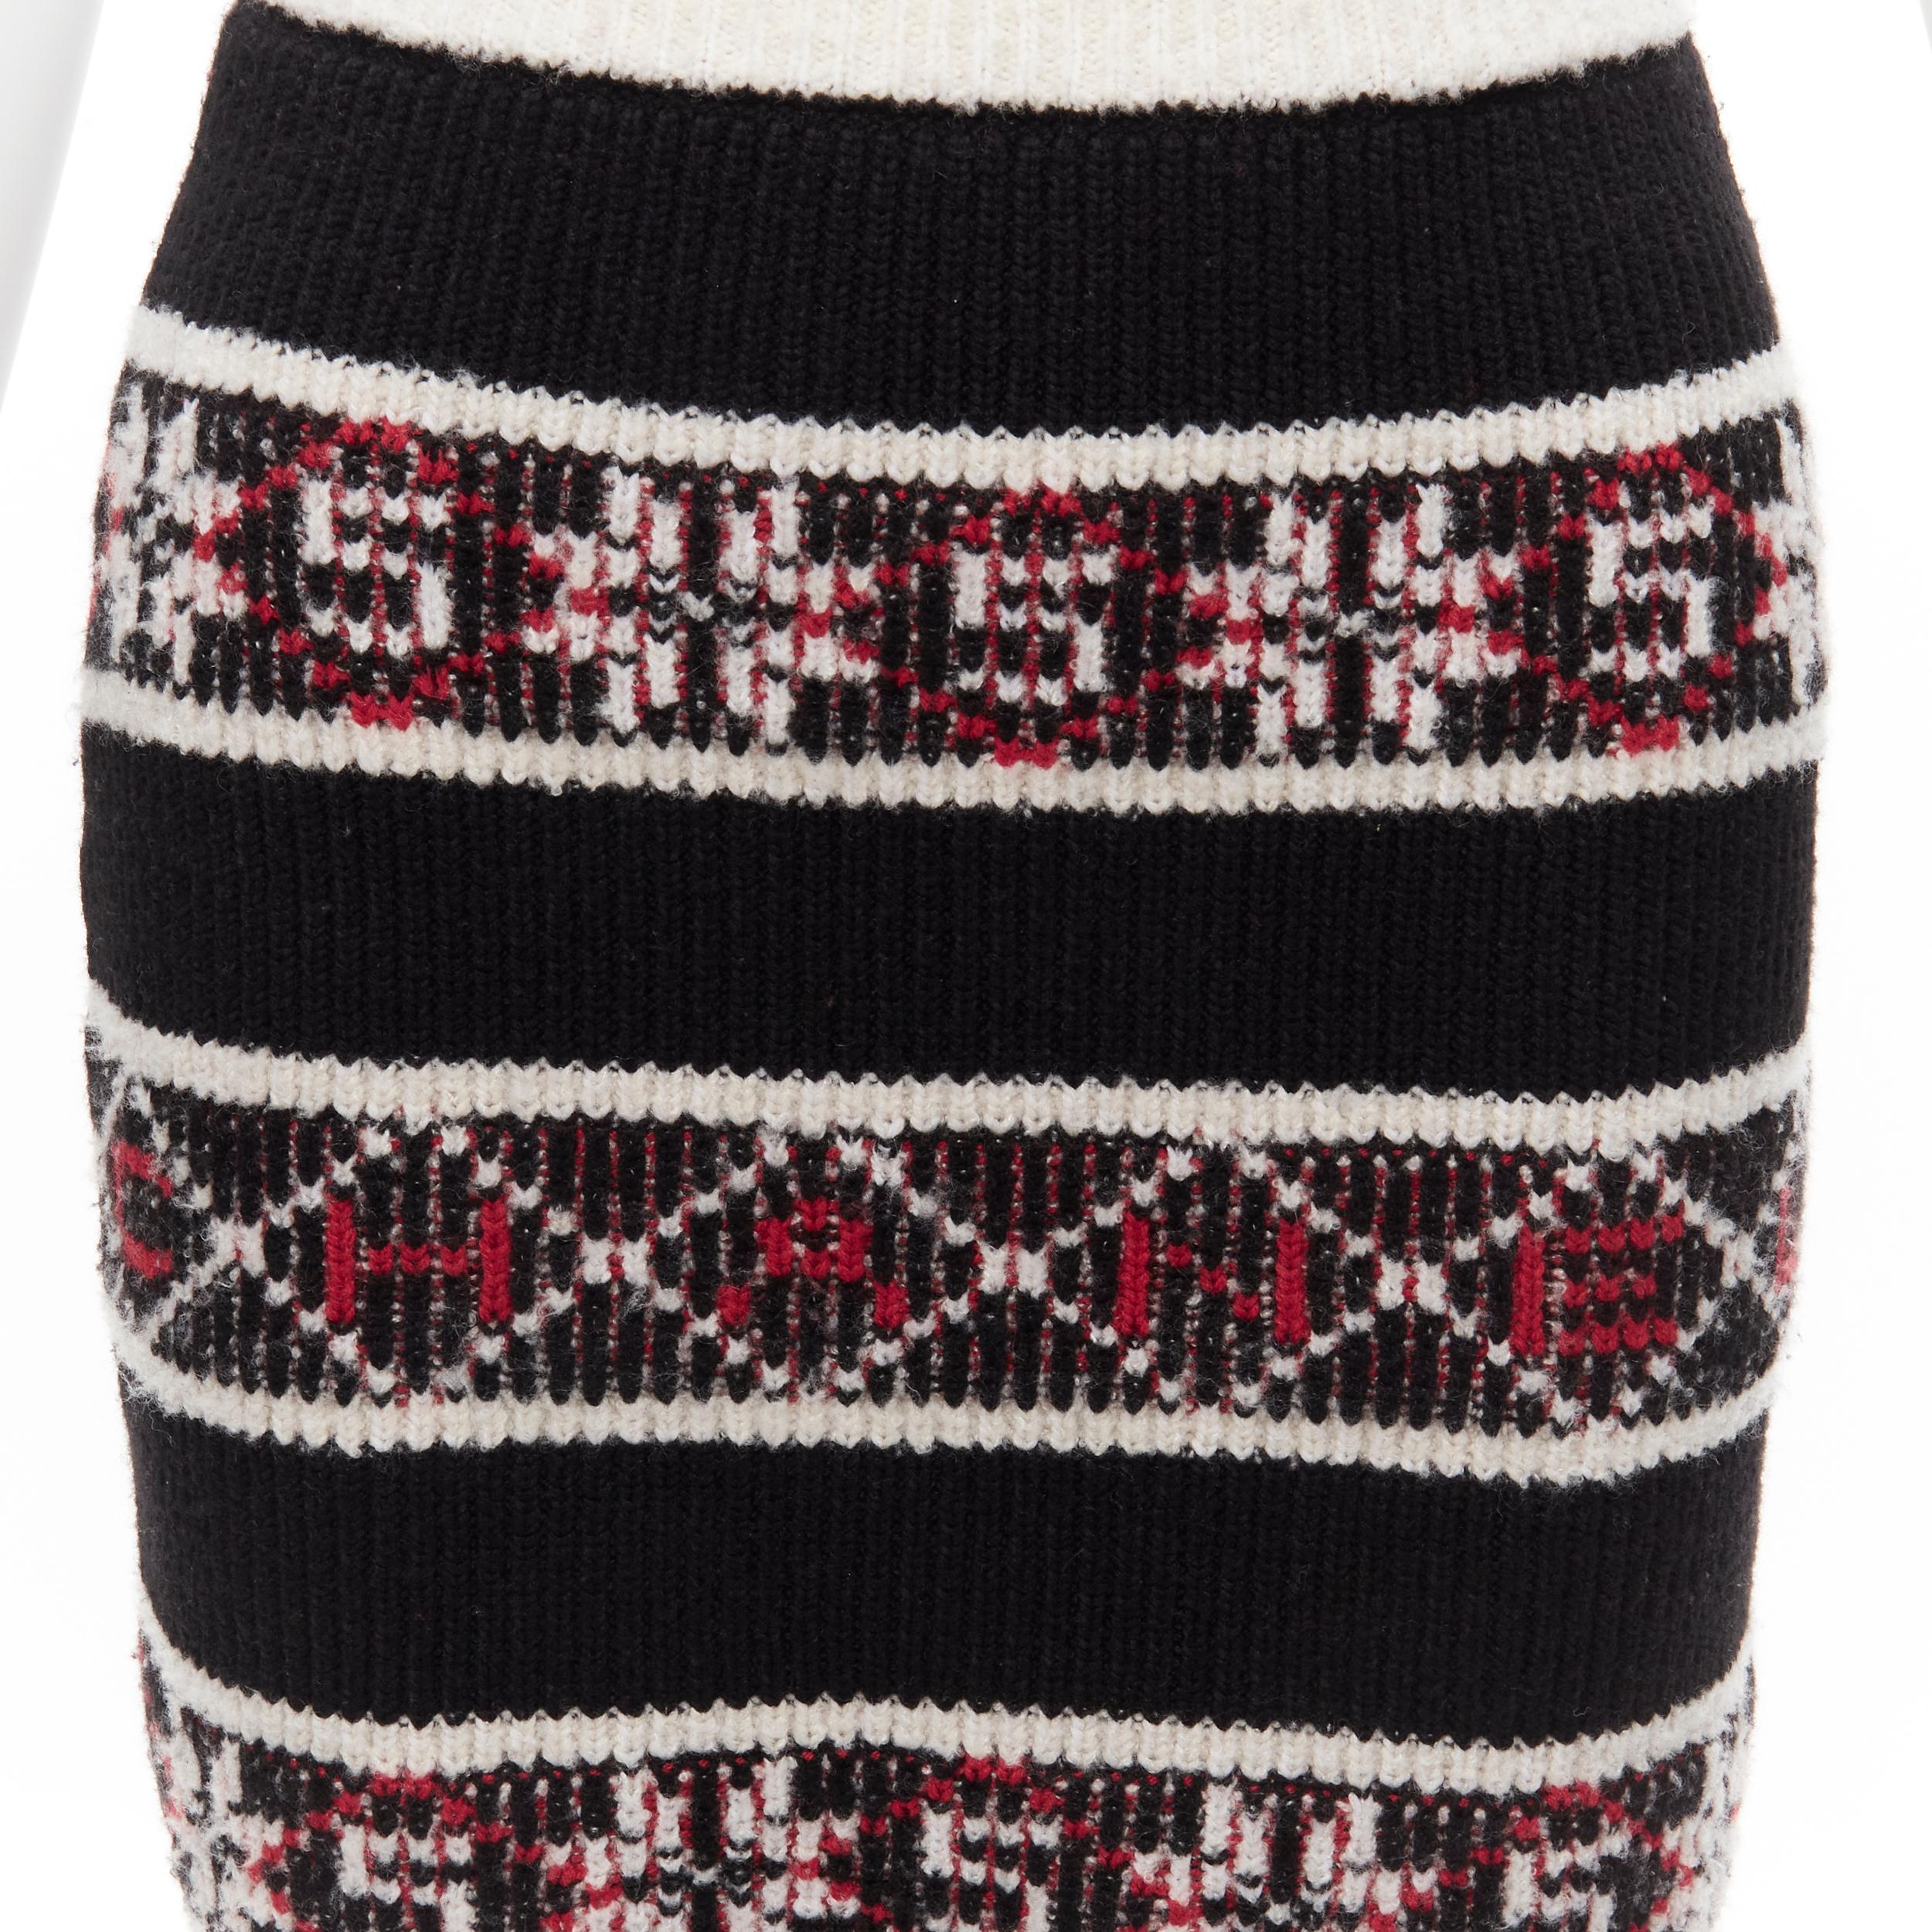 CHANEL Number 5 red black white CC logo fair isle intarsia skirt FR34 XS
Reference: CNLE/A00196
Brand: Chanel
Designer: Karl Lagerfeld
Collection: Fall 2019 - Runway
Material: Cashmere, Polyamide, Blend
Color: Black, Red
Pattern: Striped
Closure: